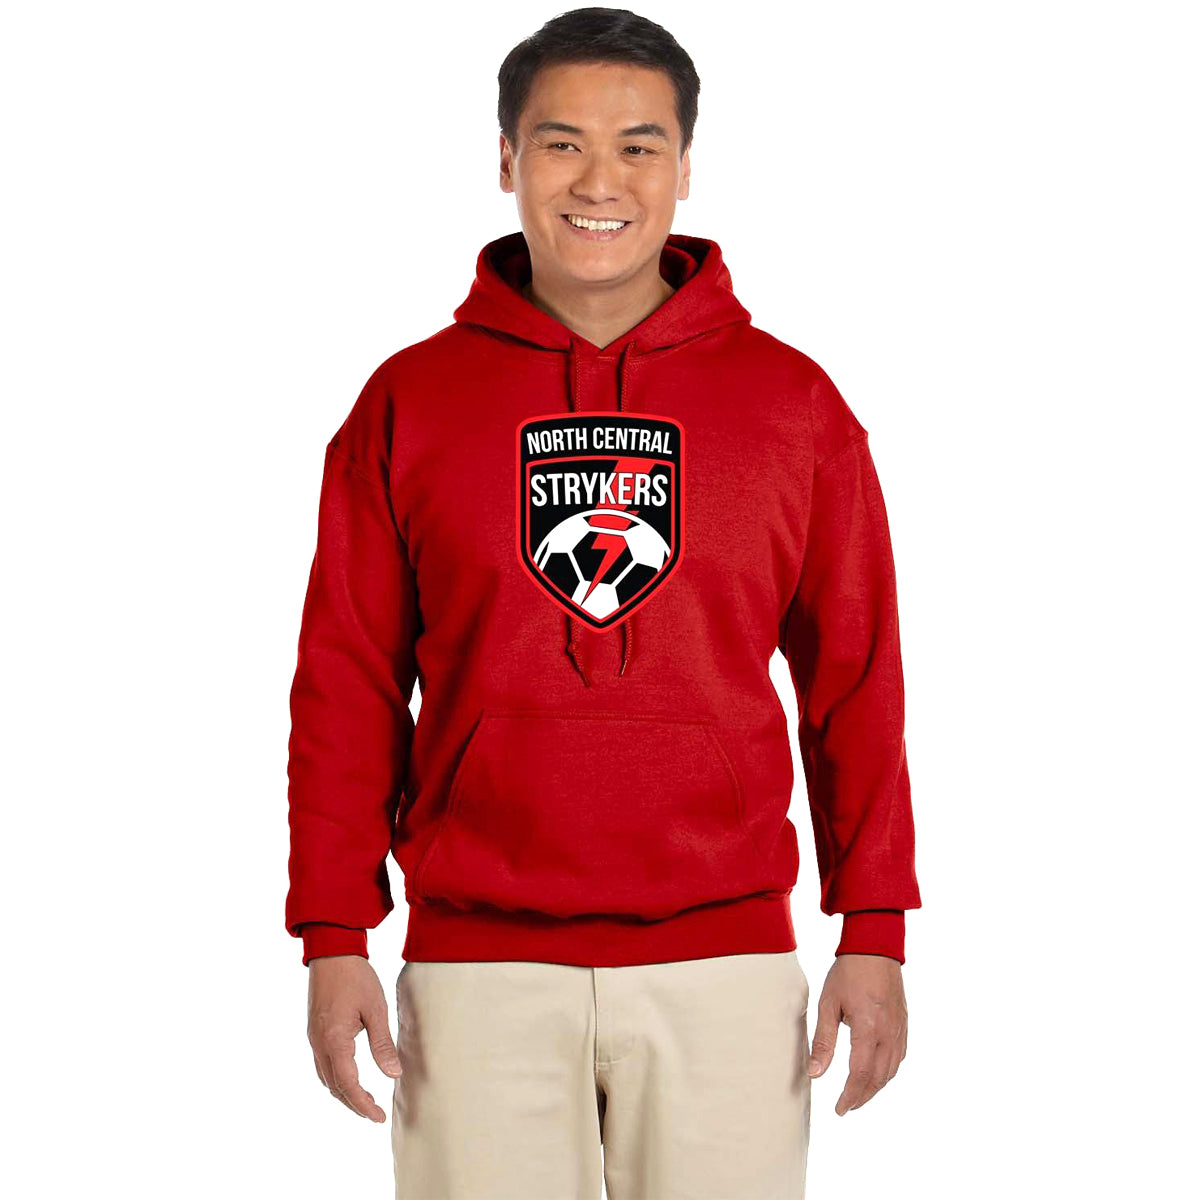 North Central Strykers Heavy Blend Hooded Sweatshirt Apparel Goal Kick Soccer Youth Medium Red 